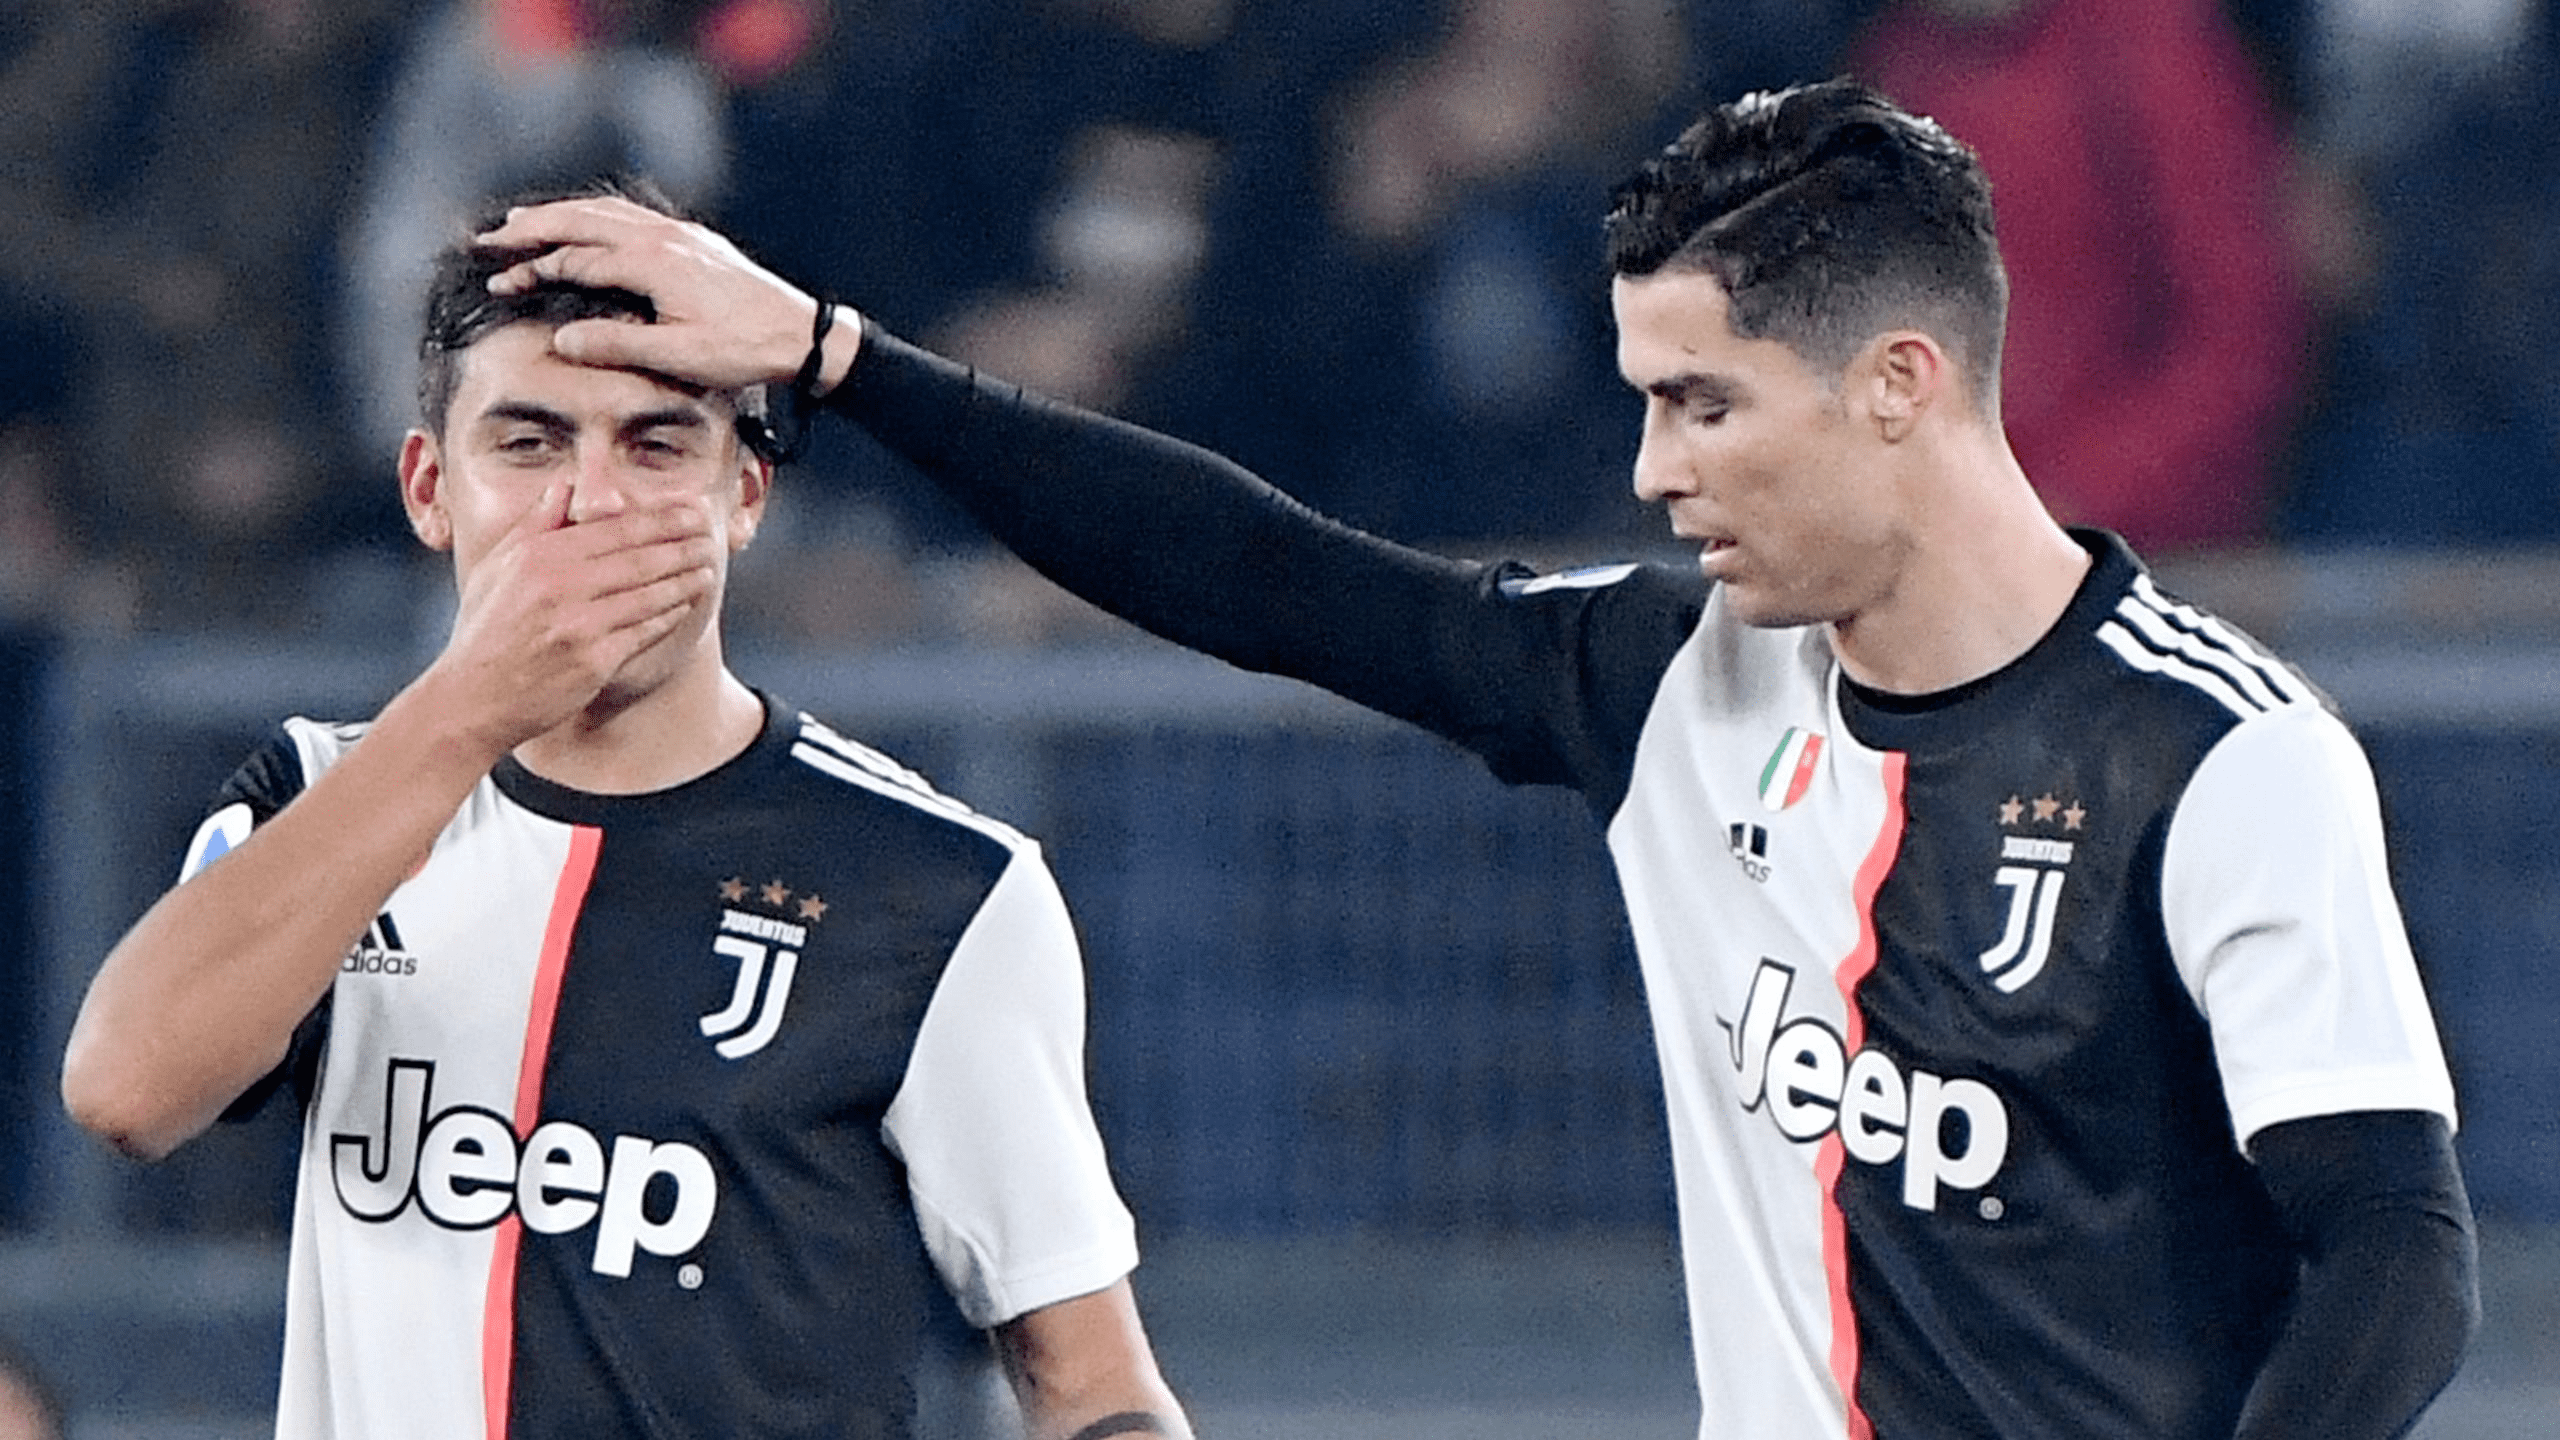 Dybala Once Claimed Cristiano Ronaldo Is “Difficult To Deal With”